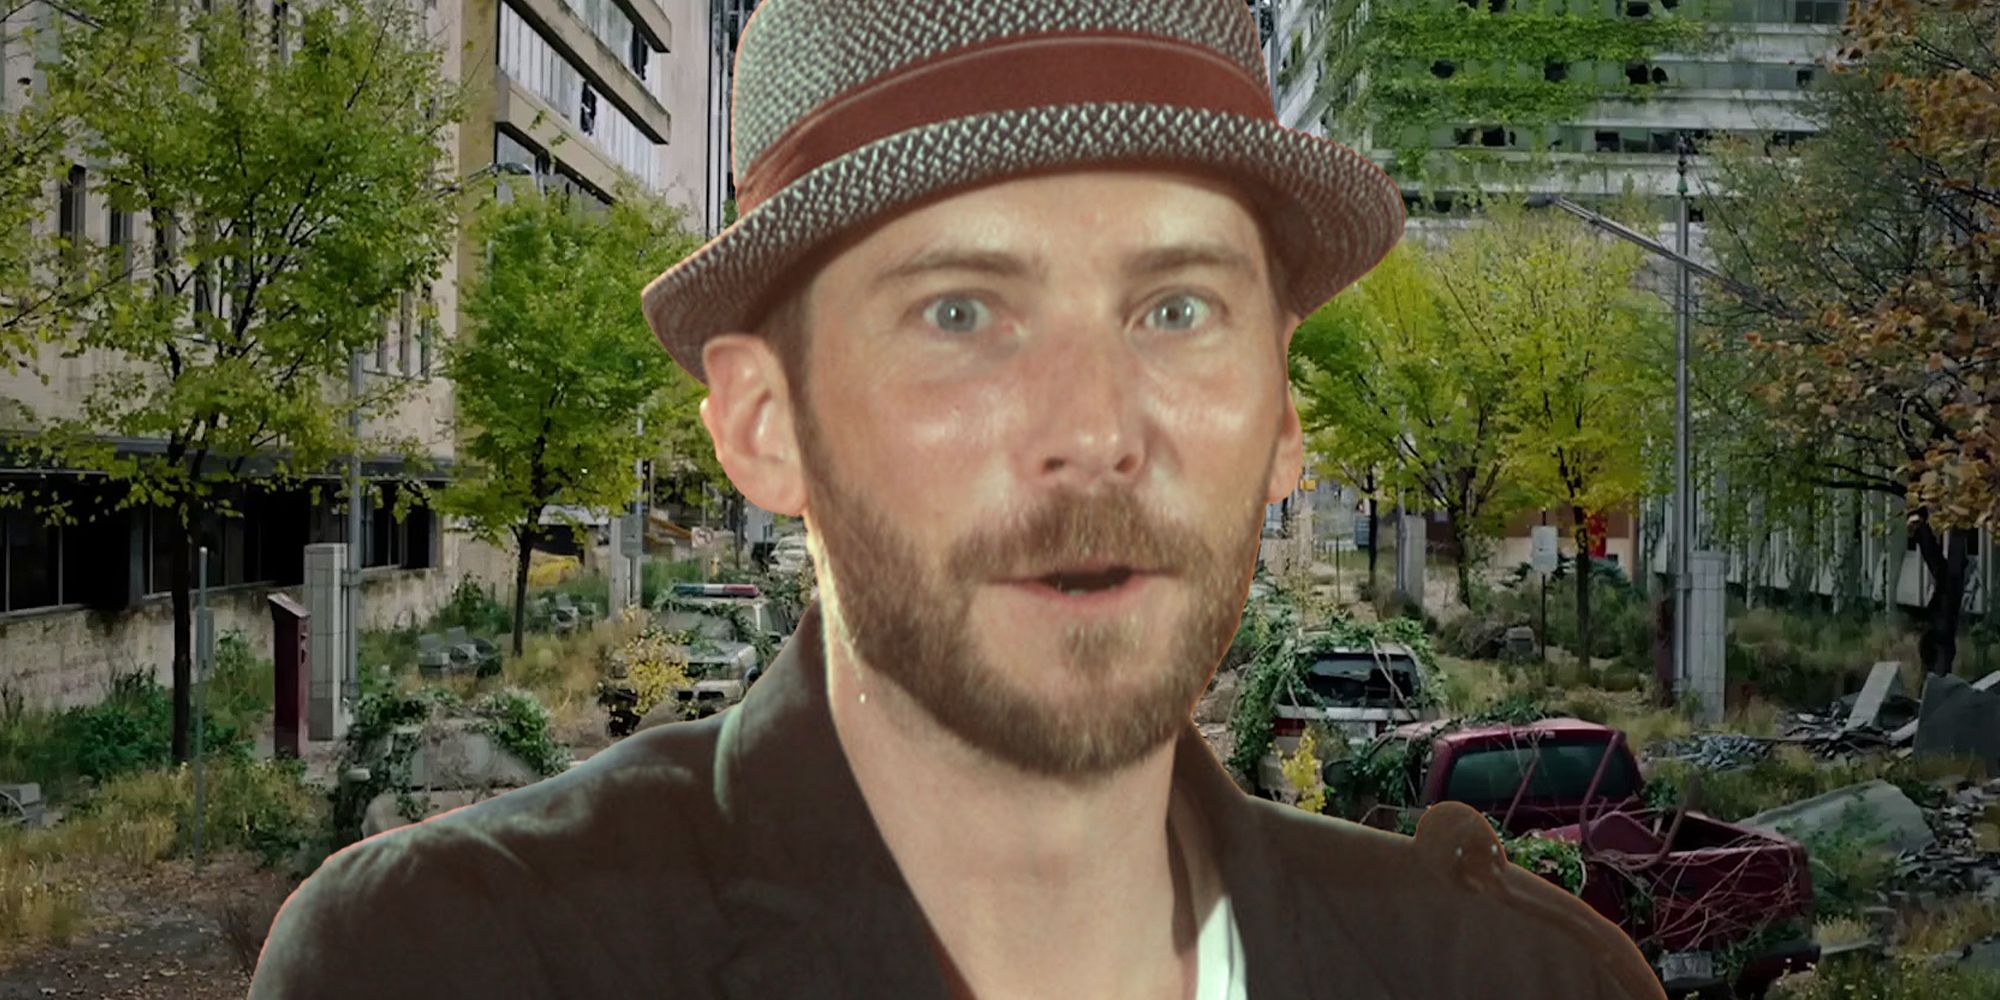 The Last of Us': Troy Baker on James, David and Playing Joel in Game